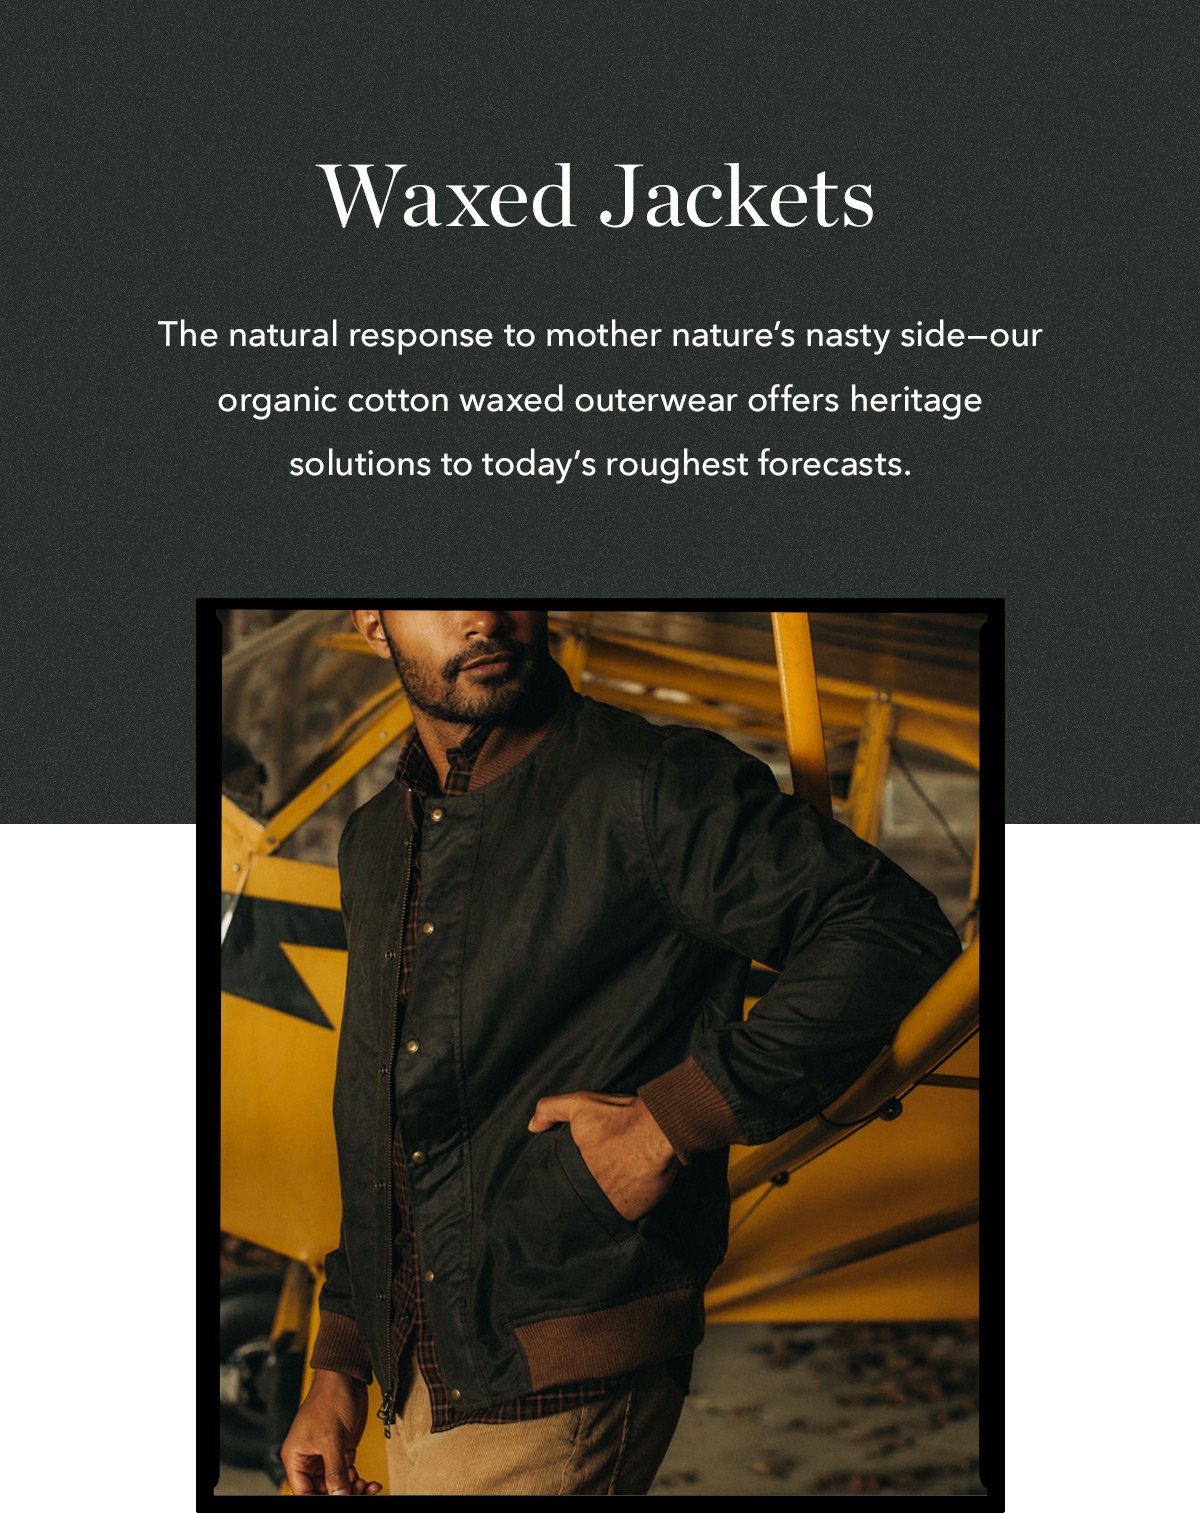 Waxed Jackets: The natural response to mother nature's nasy side--our organic cotton waxed outerwear offers heritage solutions to today's roughest forecasts.